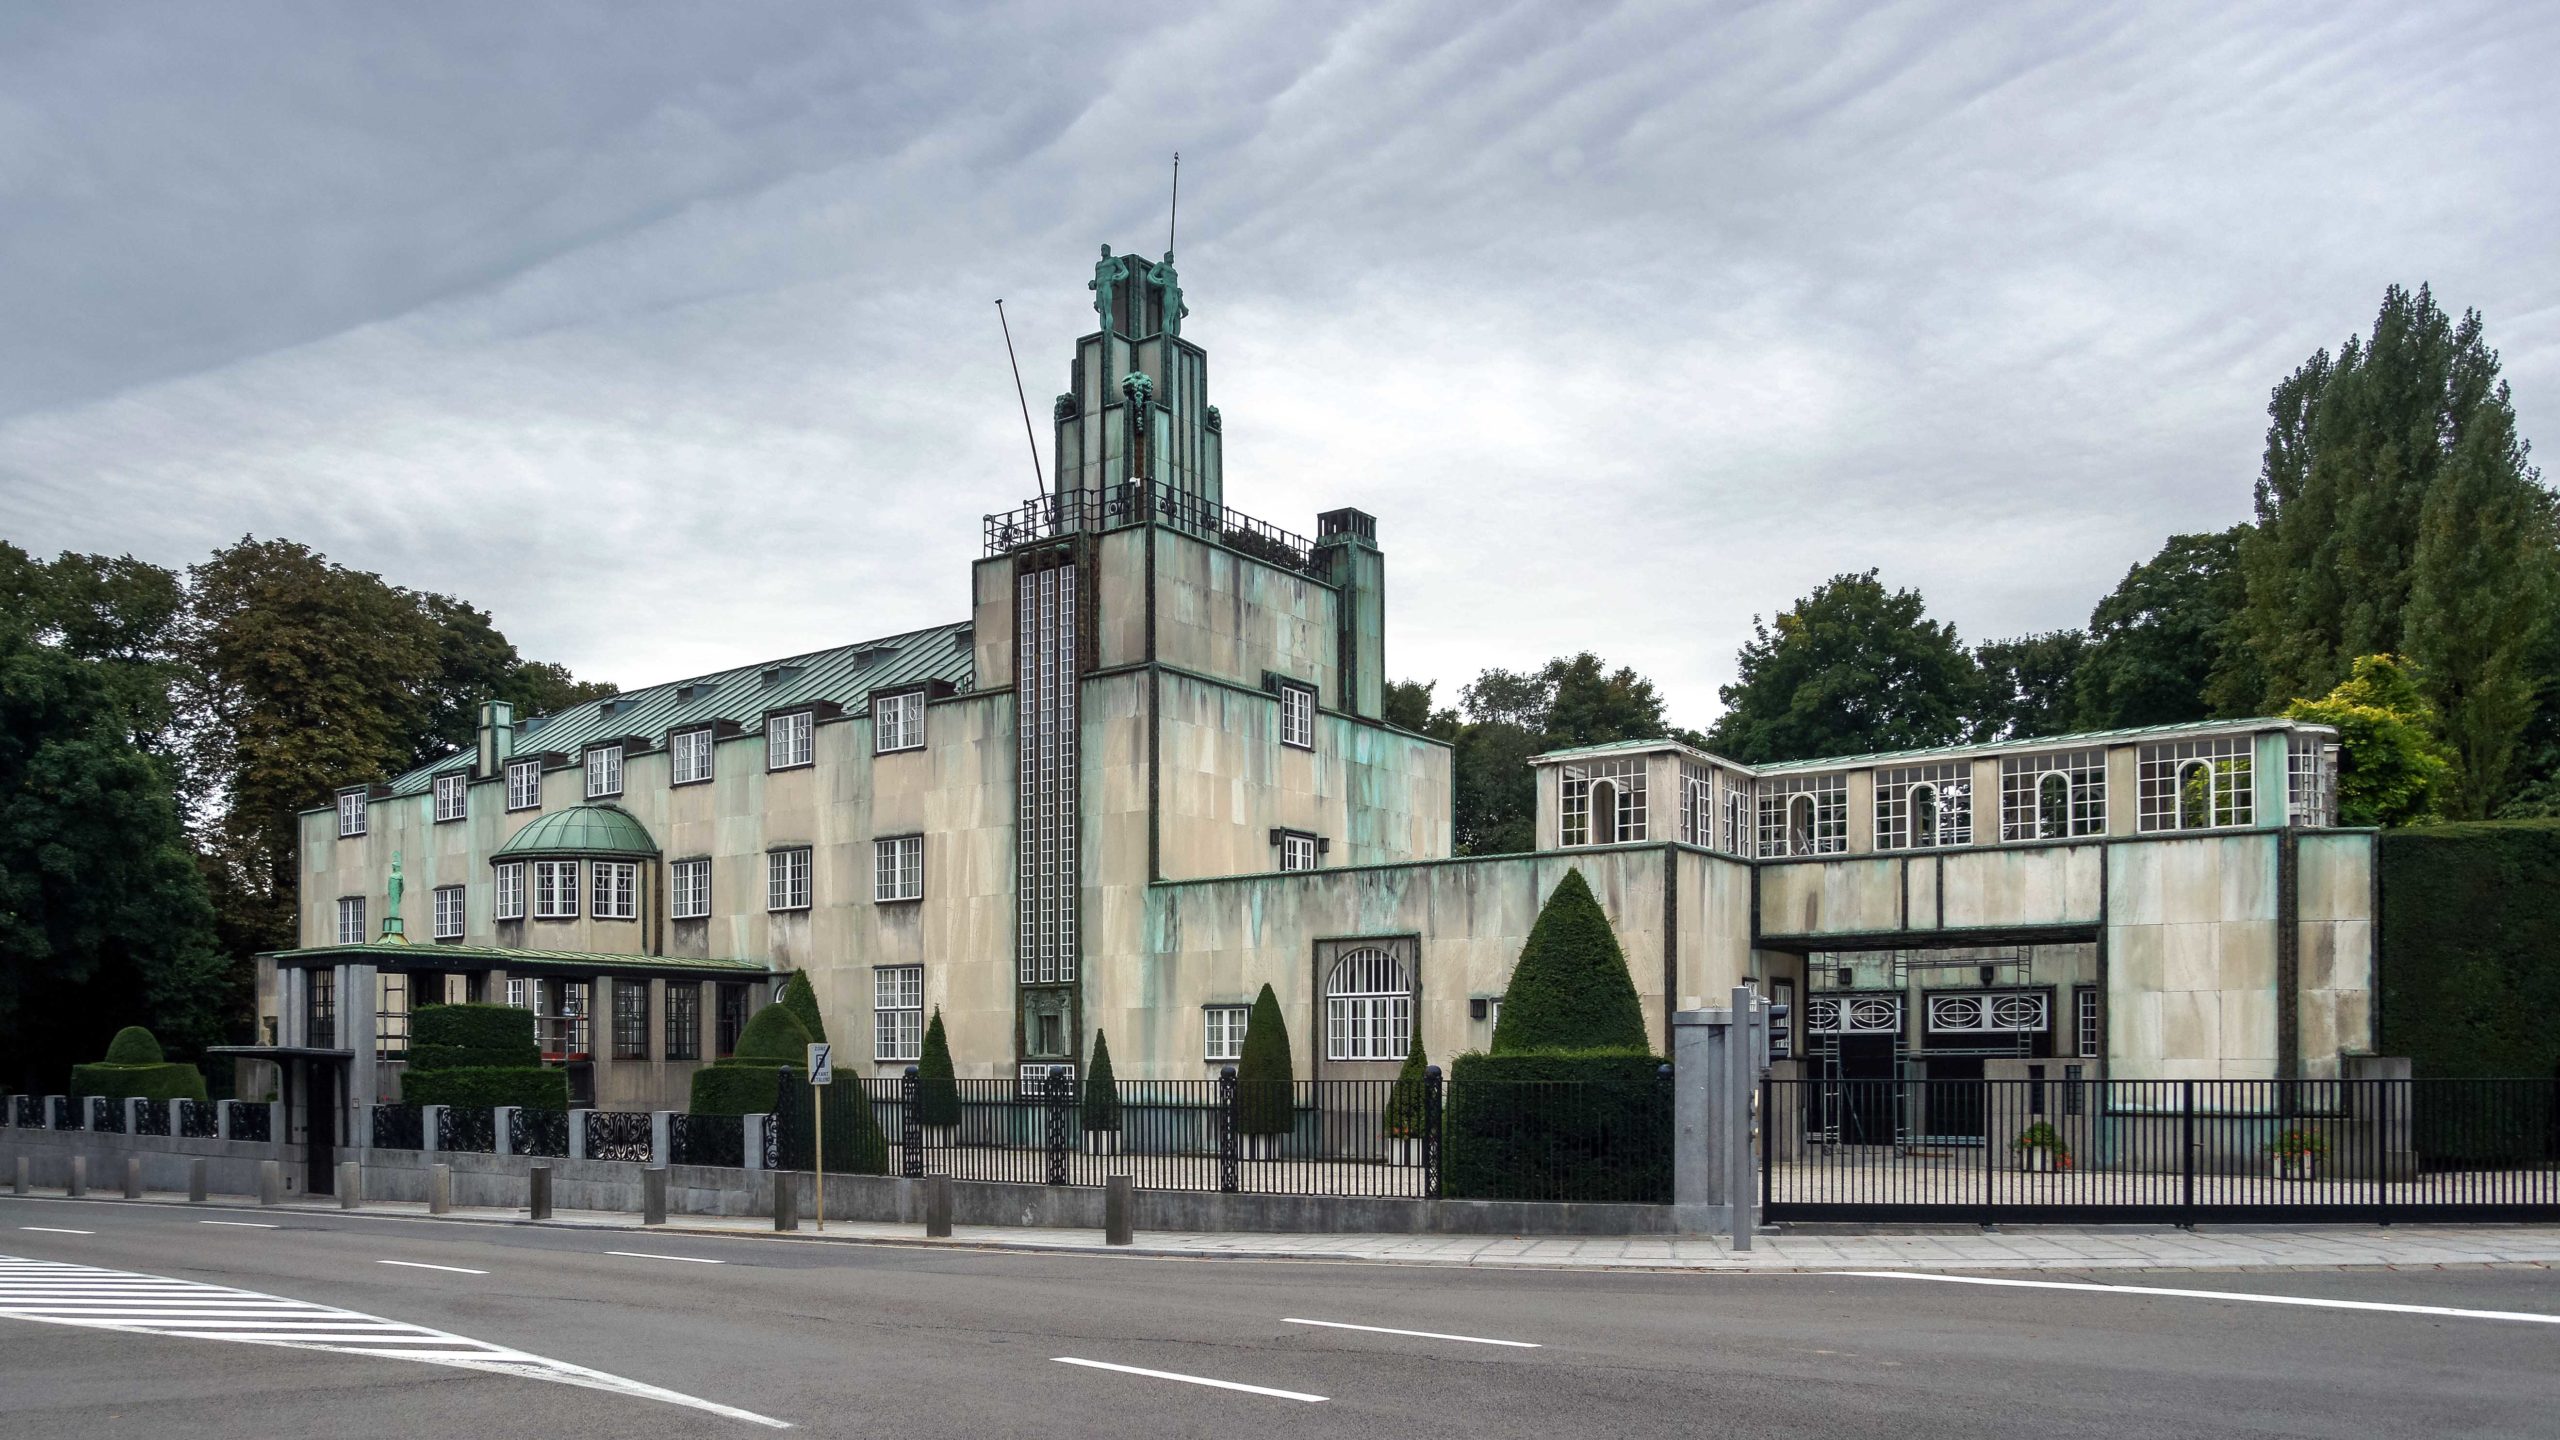 Josef Hoffmann, Palais Stoclet (Brussels), c. 1905–11 (photo: PtrQs, CC BY-SA 4.0) <https://commons.wikimedia.org/wiki/File:20120923_Brussels_PalaisStoclet_Hoffmann_DSC06725_PtrQs.jpg>